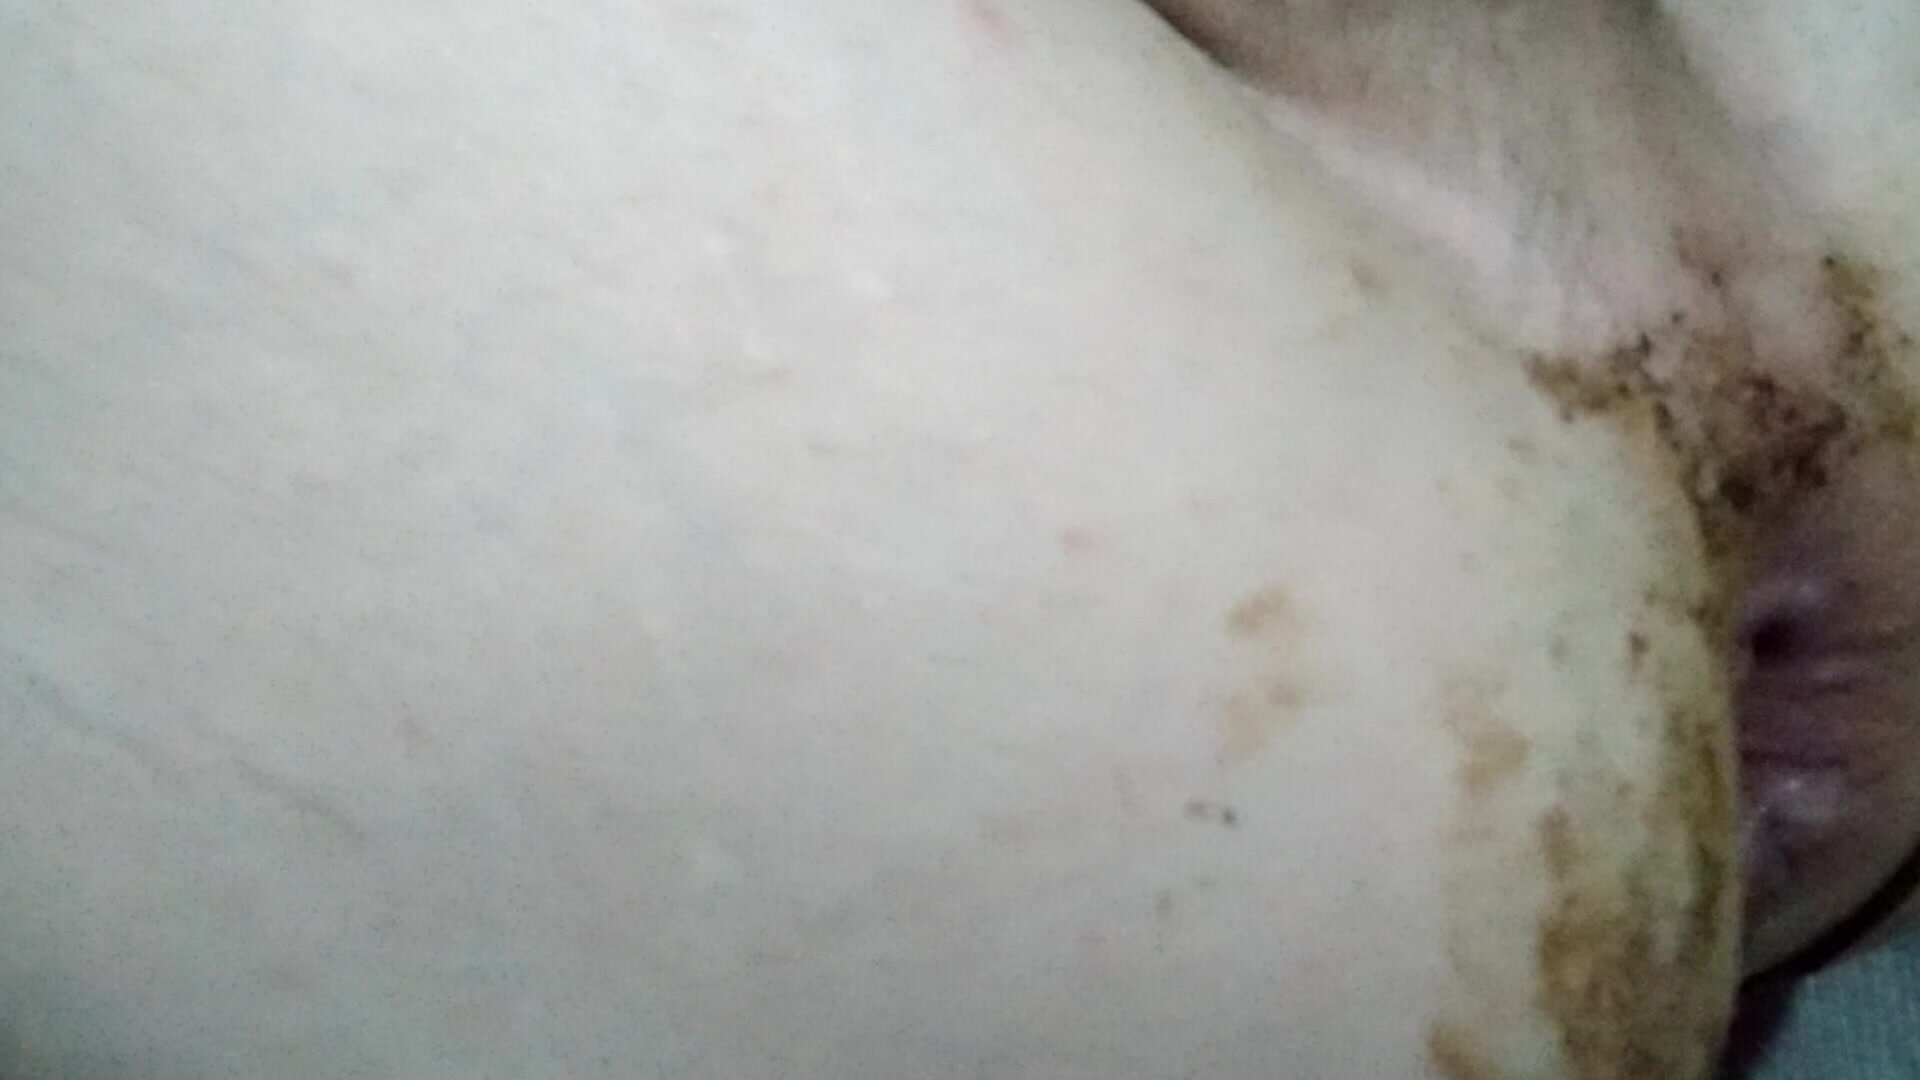 Wrecking my dirty sissy fuck hole